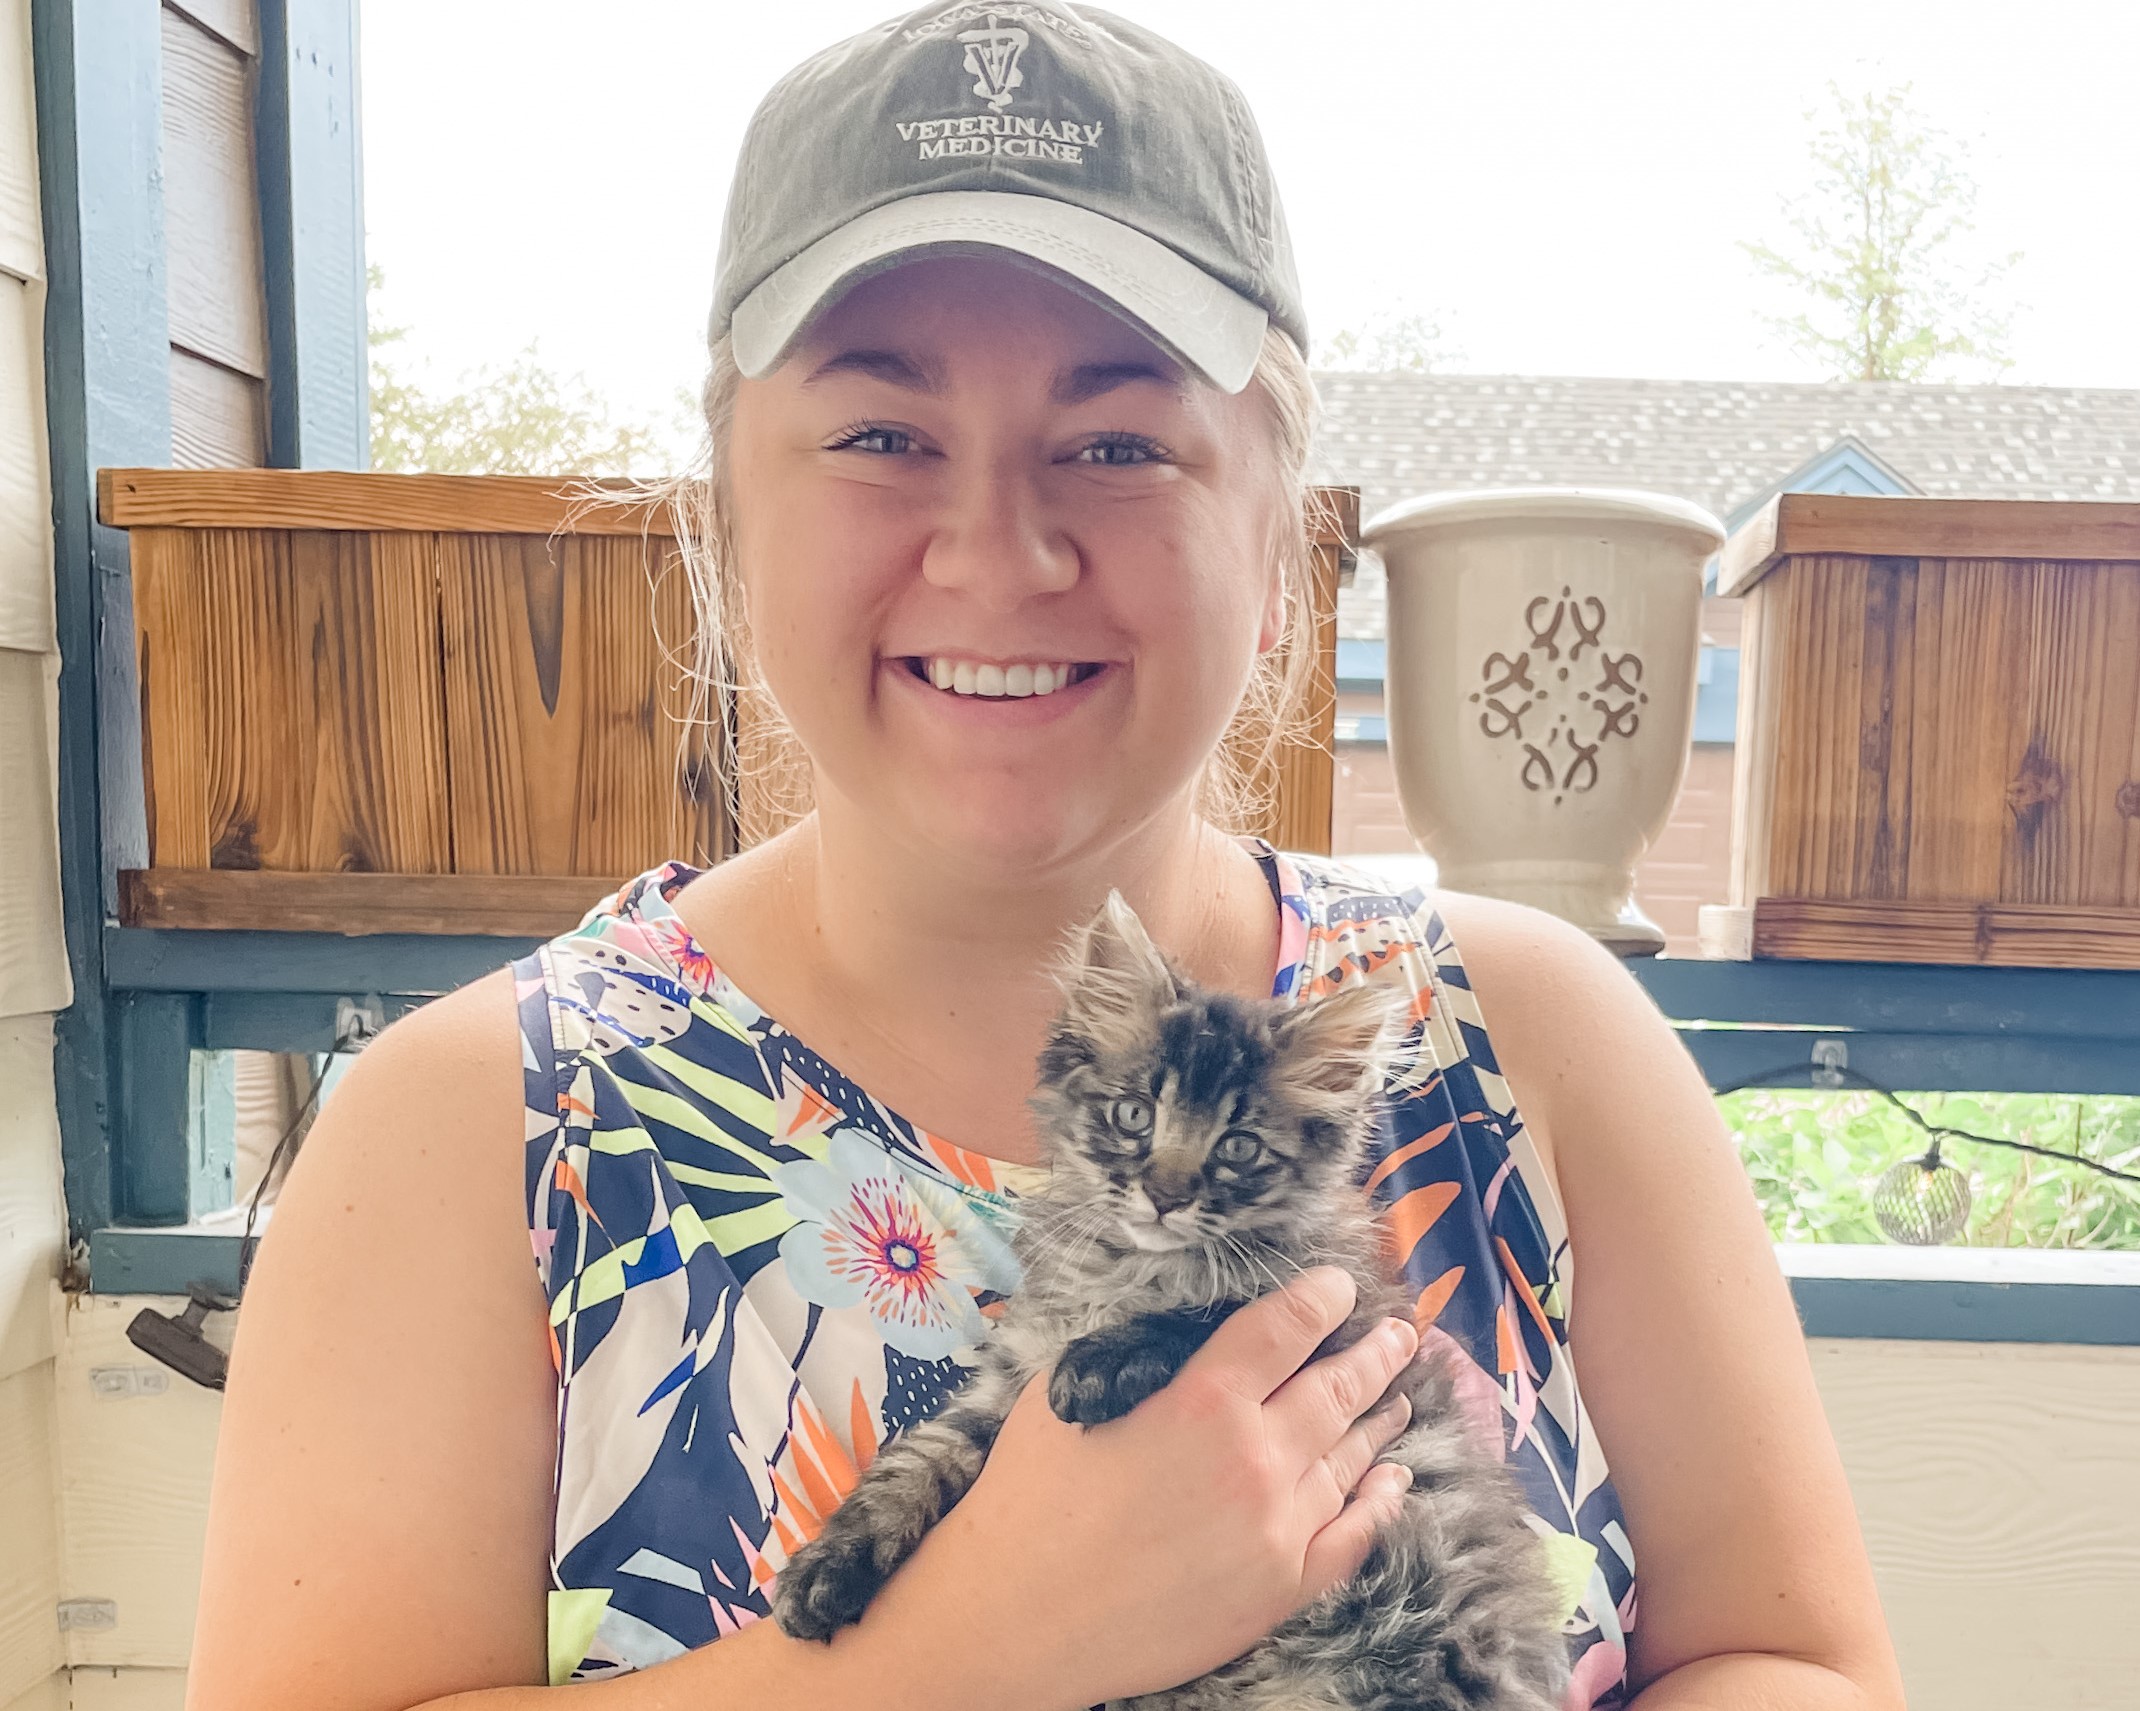 Blonde woman smiling and holding her healthy, gray kitten